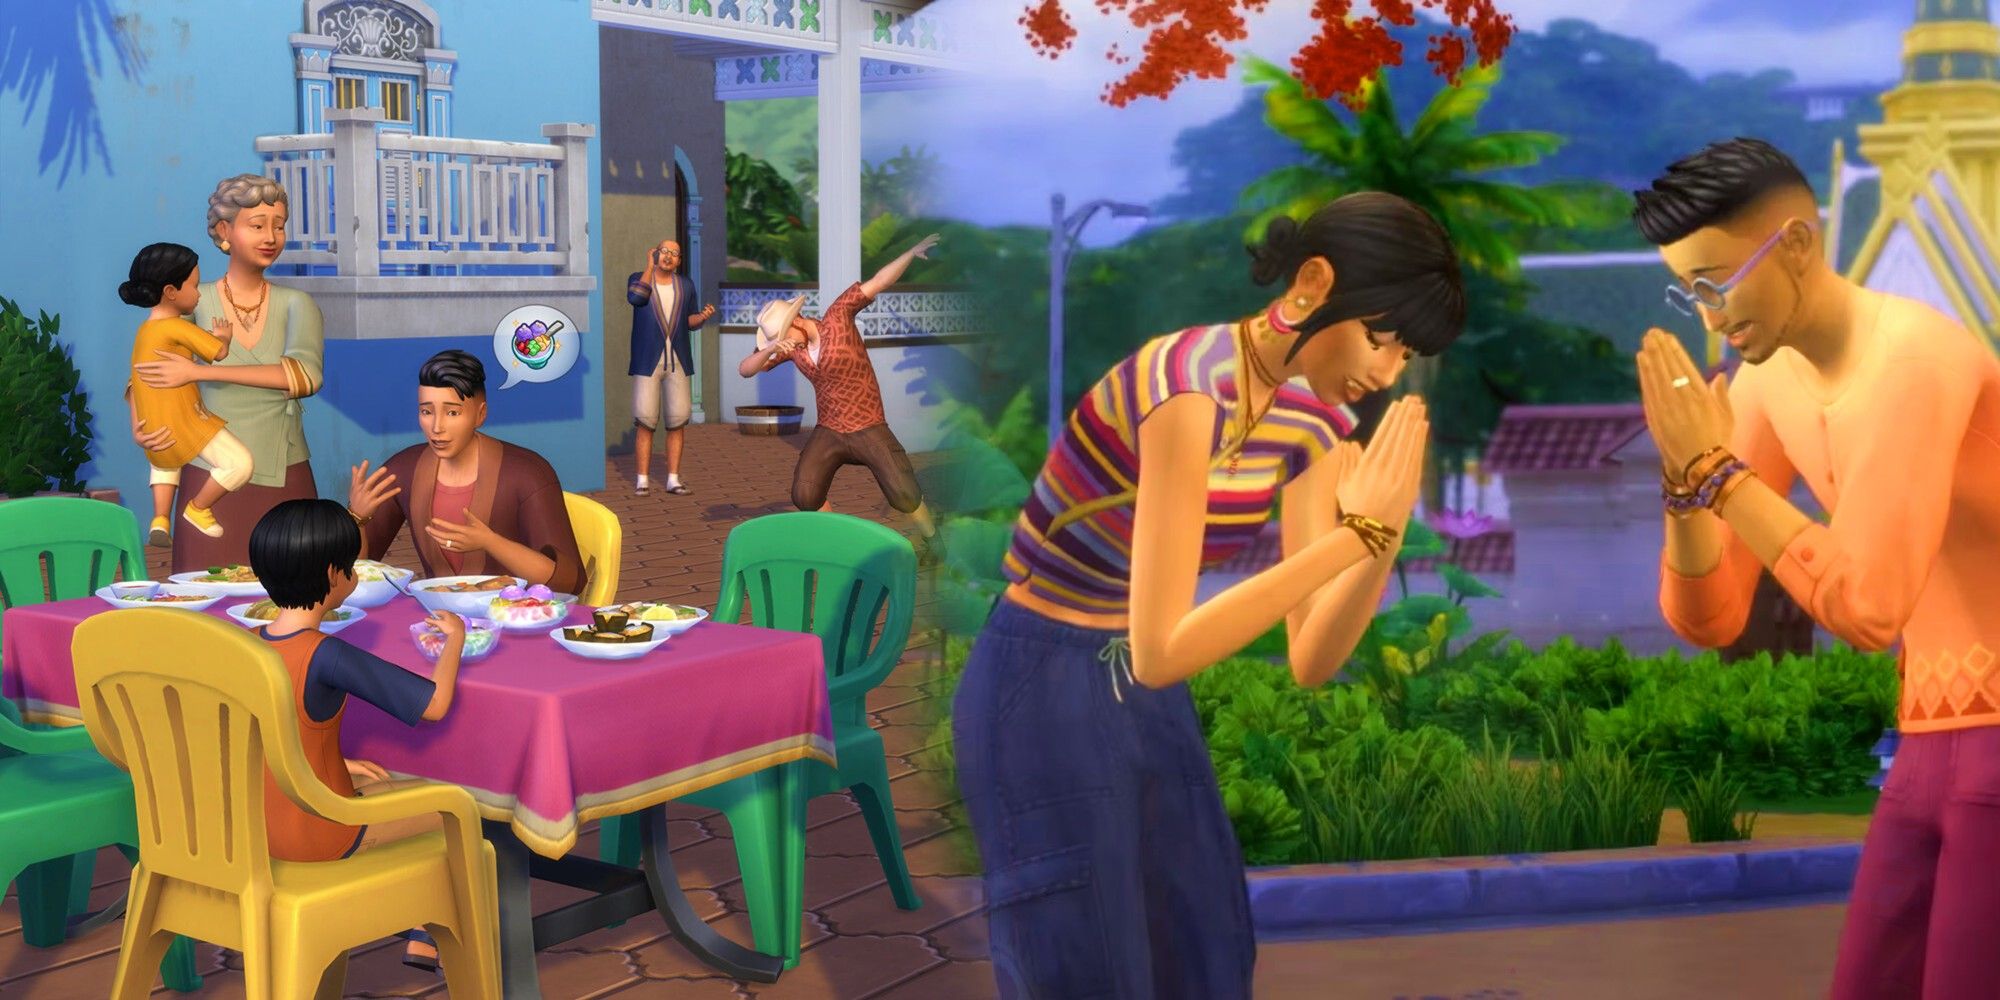 Sims 4 characters around a table alongside Sims 4 characters bowing respectfully.